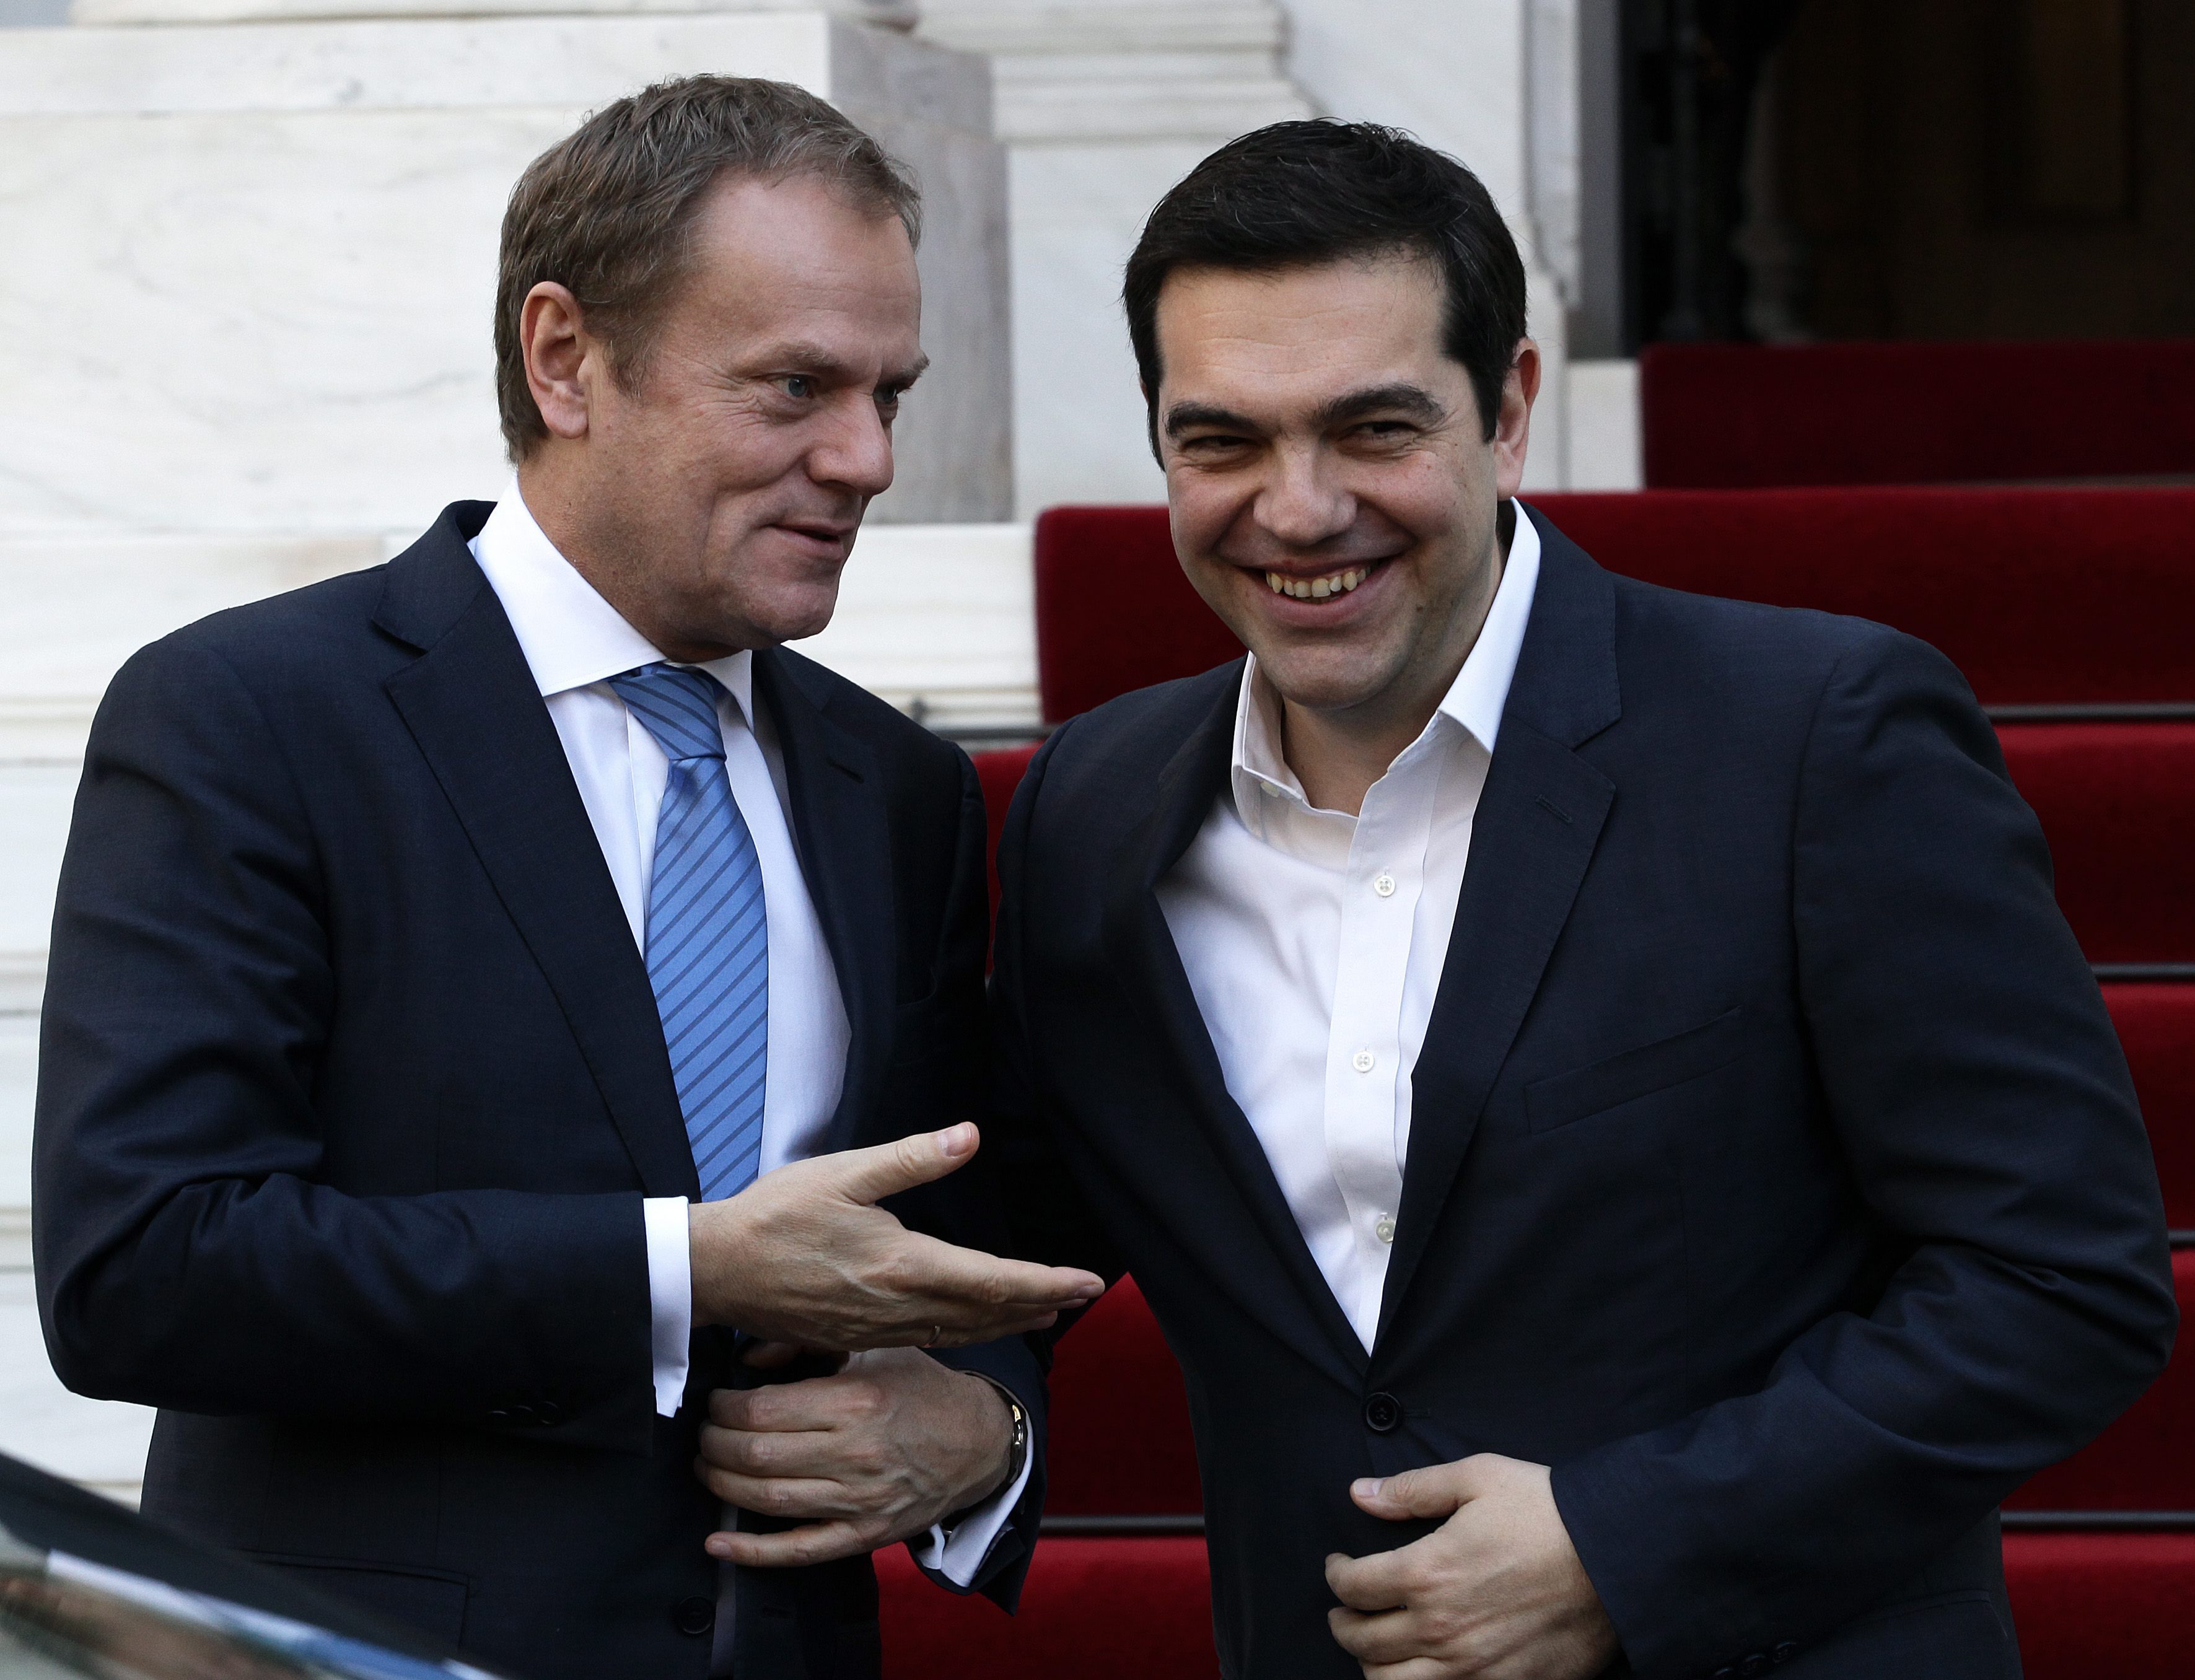 PM Tsipras and Tusk meet in Athens ahead of EU summit on refugees